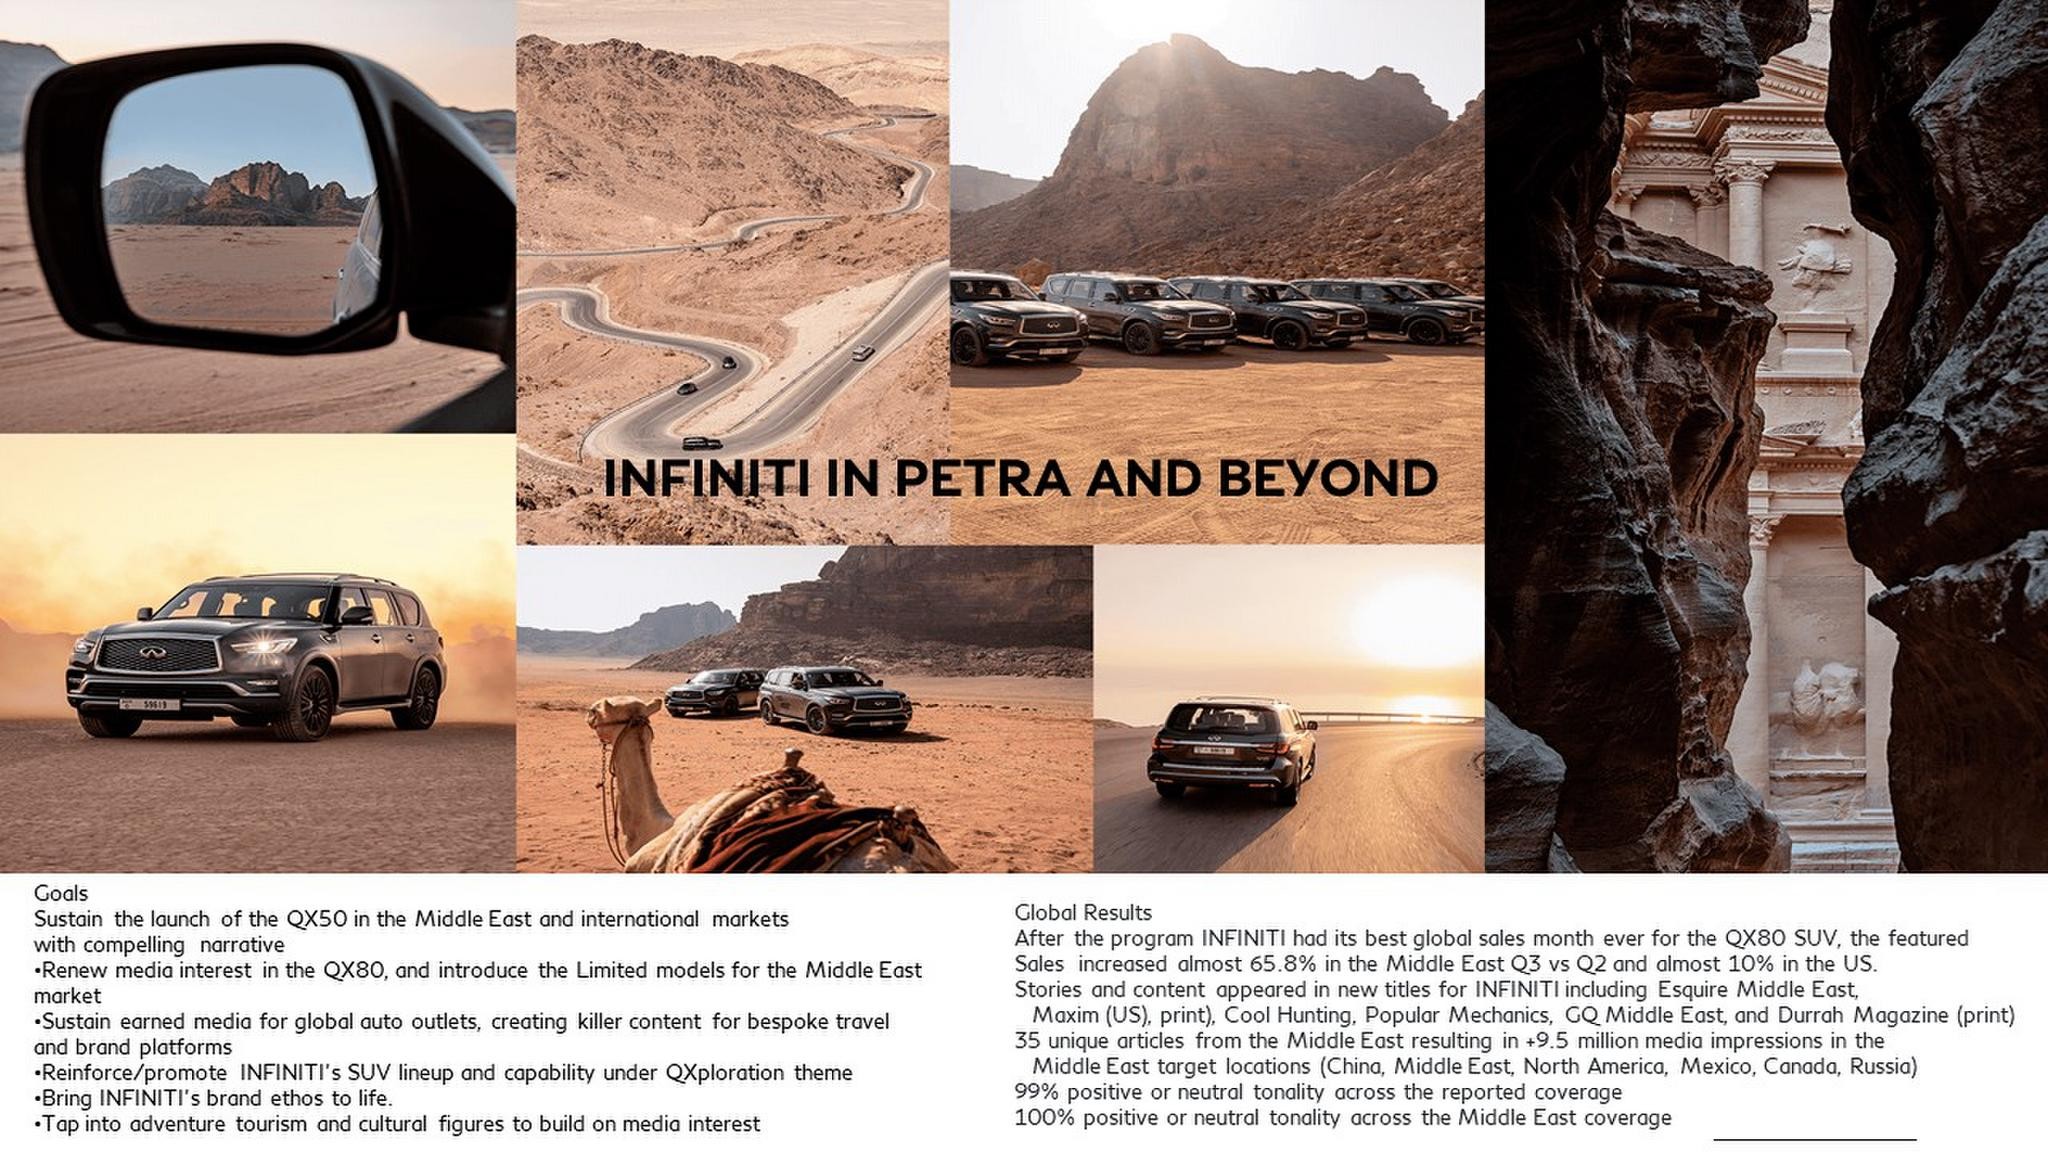 INFINITI in Petra and Beyond - How out-of-this world thinking and experiences el